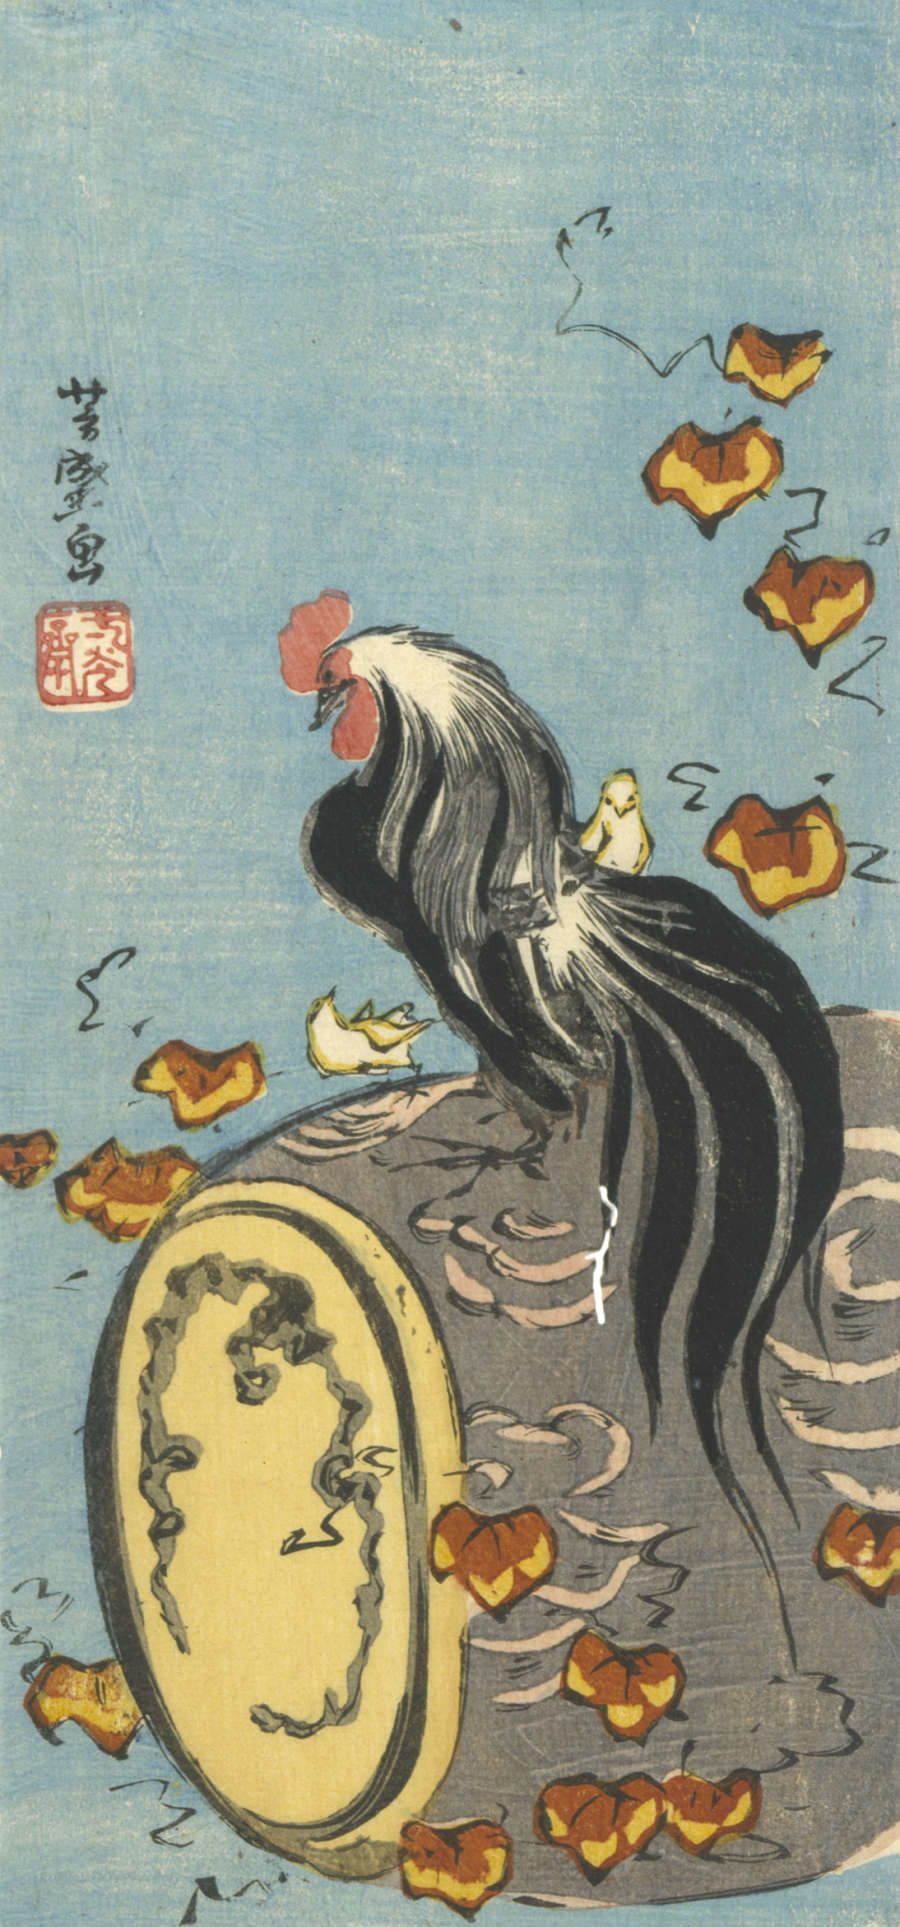 A woodblock print of a red-crested black rooster perched on a wooden drum. Red and yellow ivy leaves swirl around the rooster.